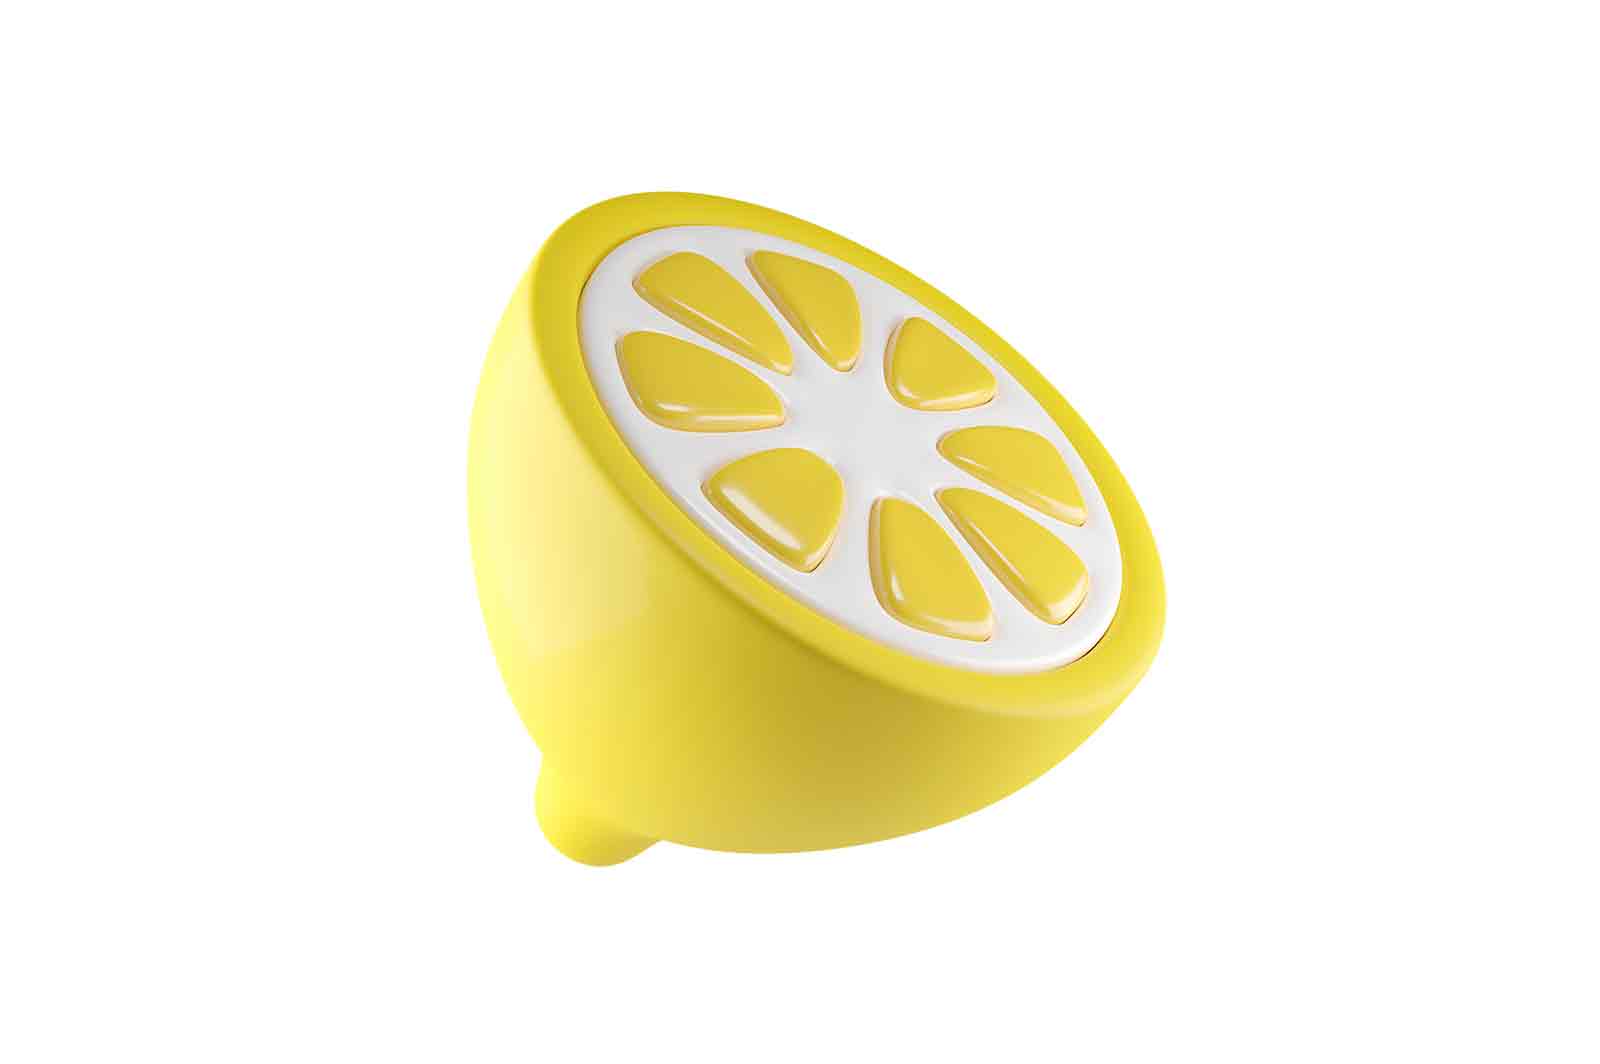 Lemon squeezer, 3d rendered illustration of a yellow plastic that is shaped like a lemon.